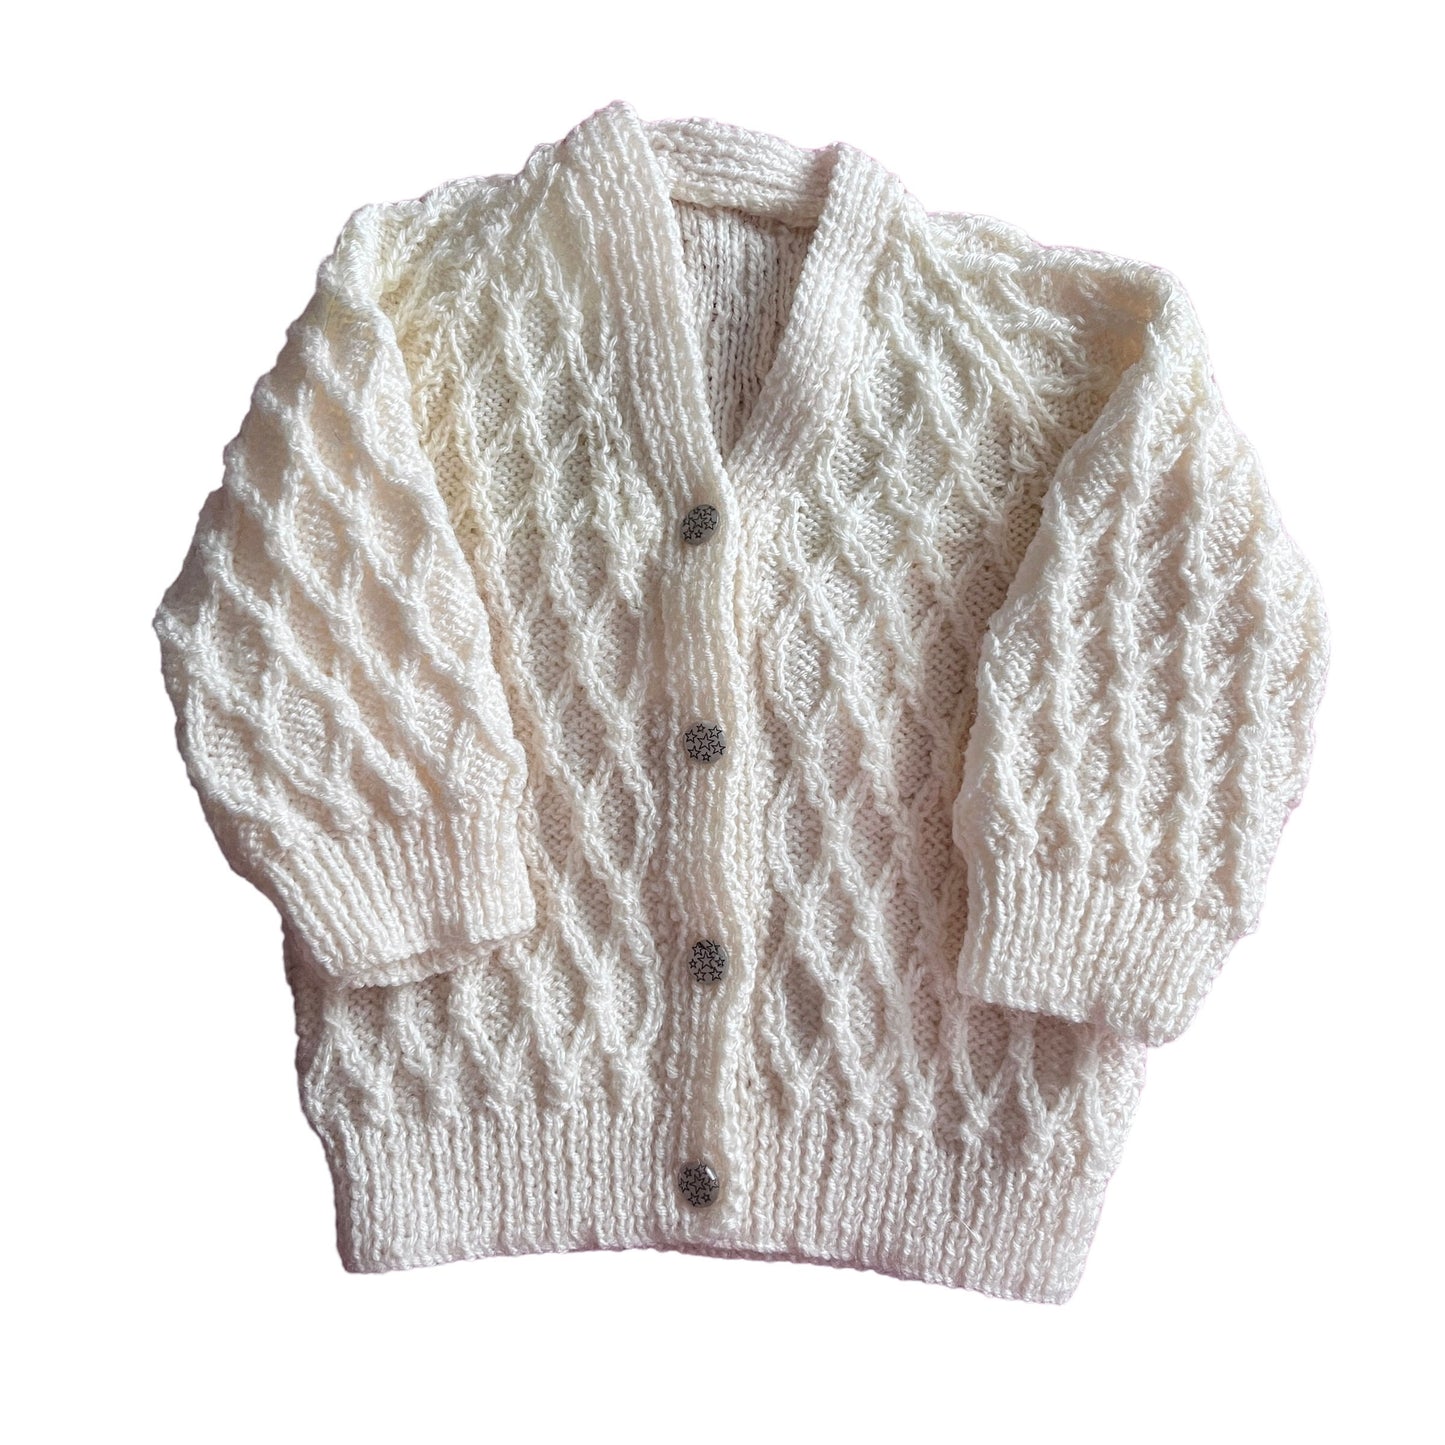 Vintage White Knitted Textured Cardigan 0-6 Months